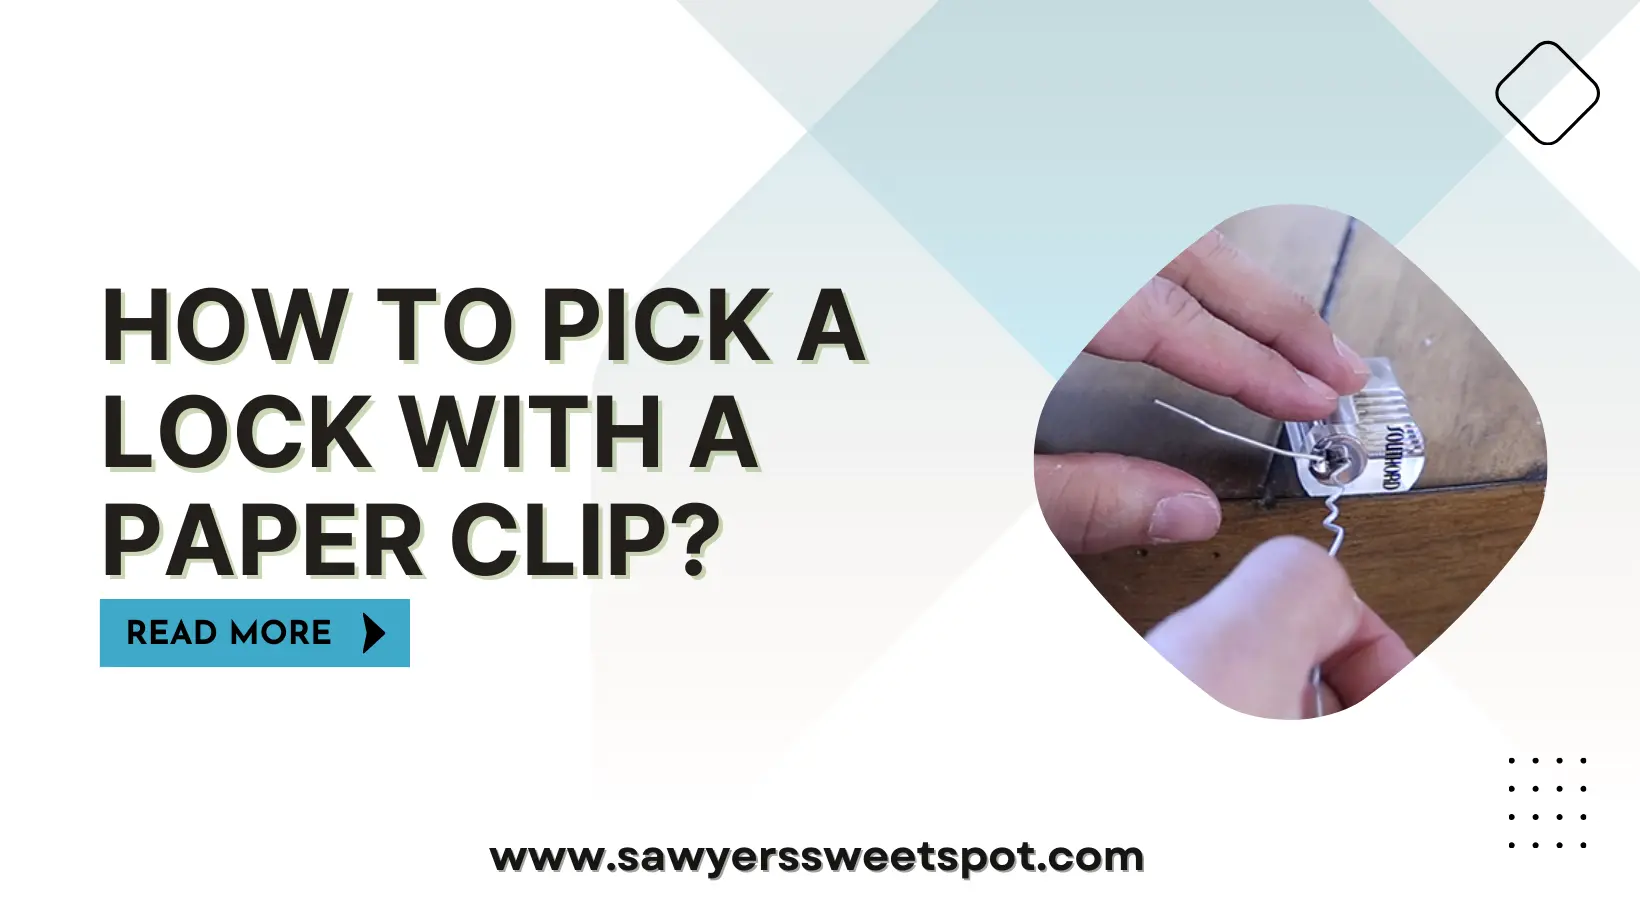 How to Pick a Lock with a Paper Clip?